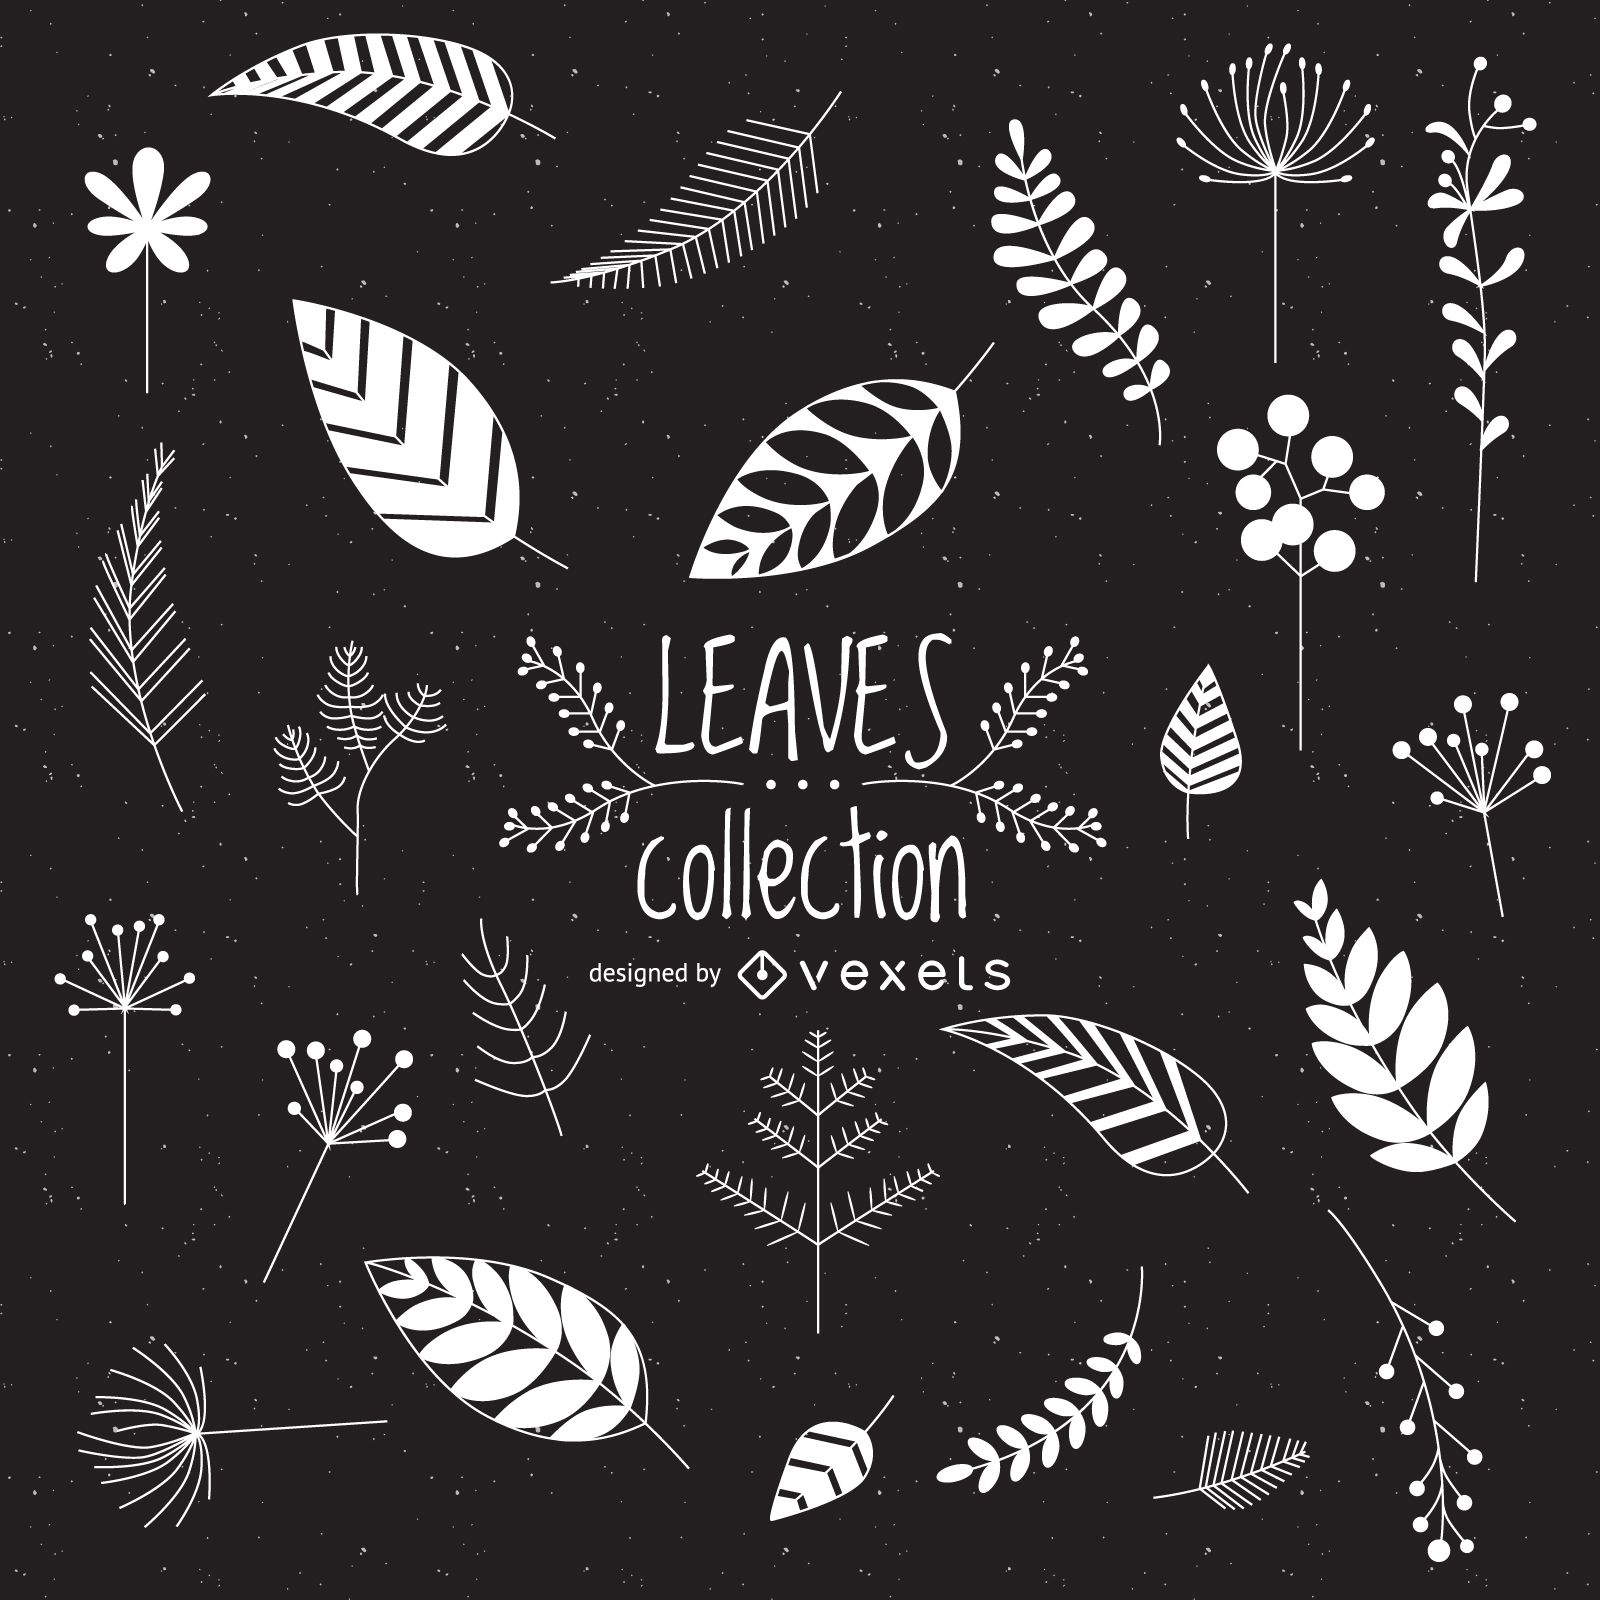 Illustrated leaves collection